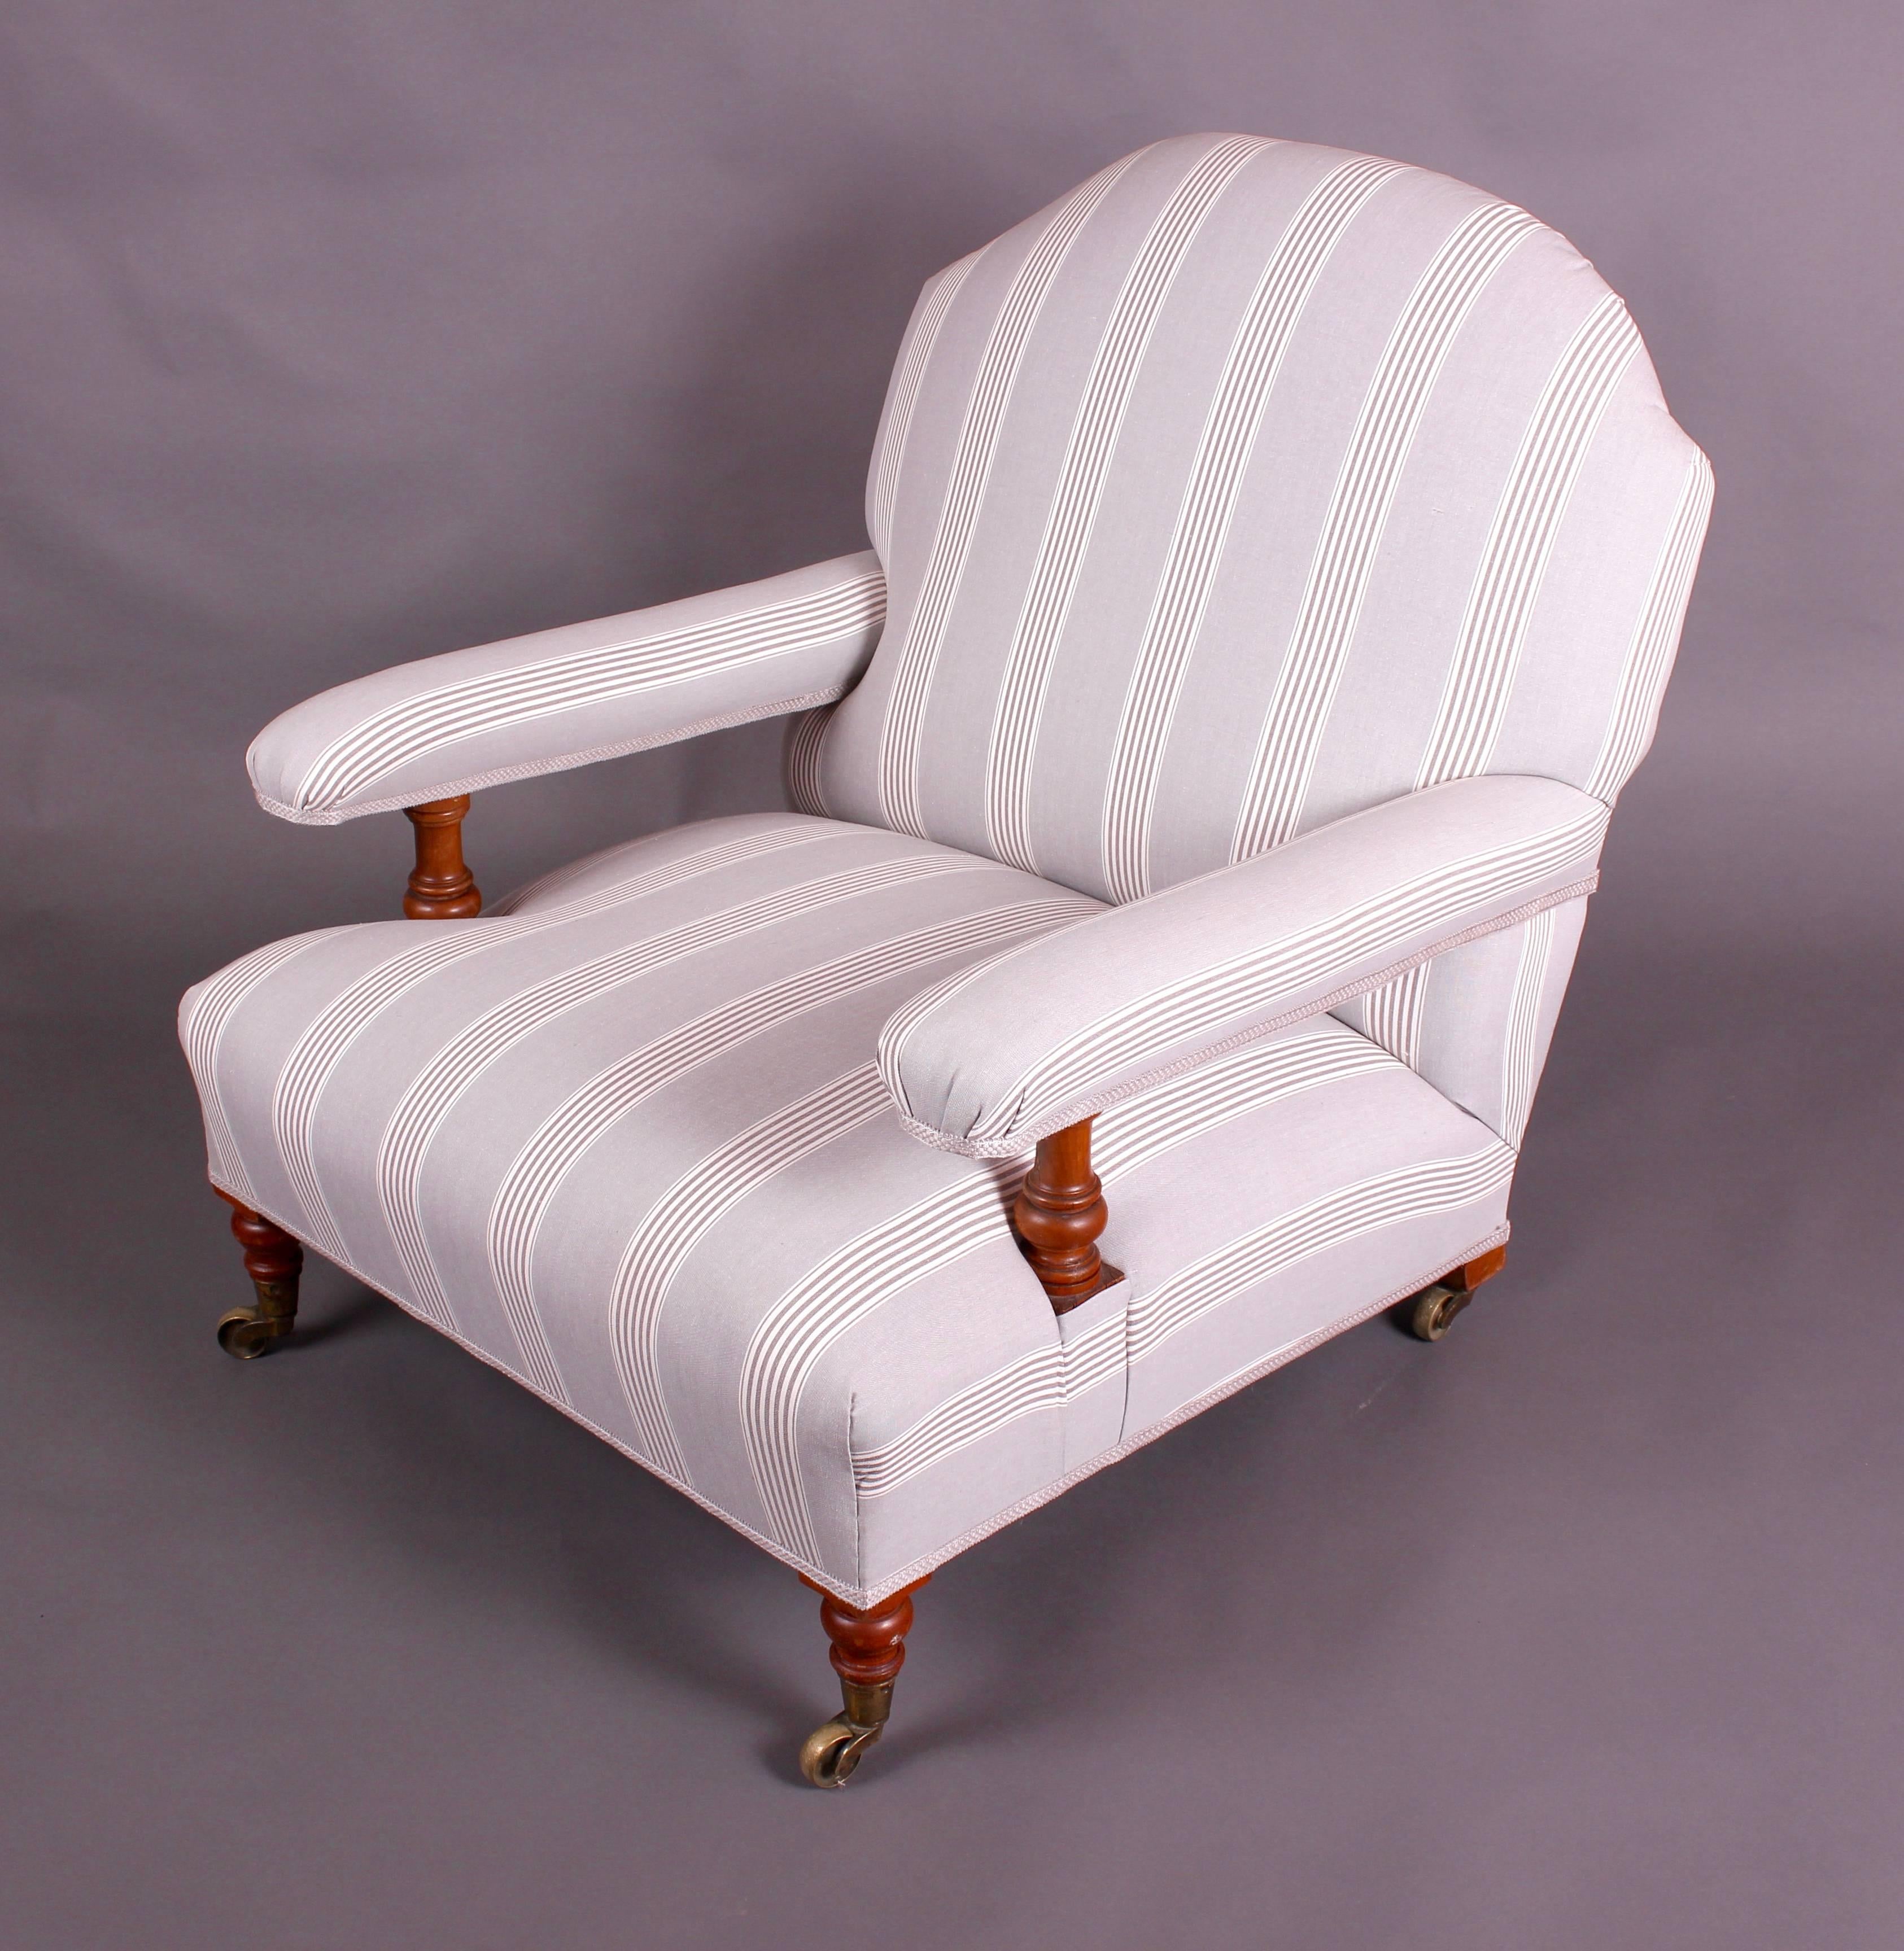 A lovely fully restored easy armchair by the famous maker Howard & Sons. We have used an almost identical fabric which was originally on the chair. The chair has been strengthened and stands strong and sturdy. Upholstered by our Sussex based